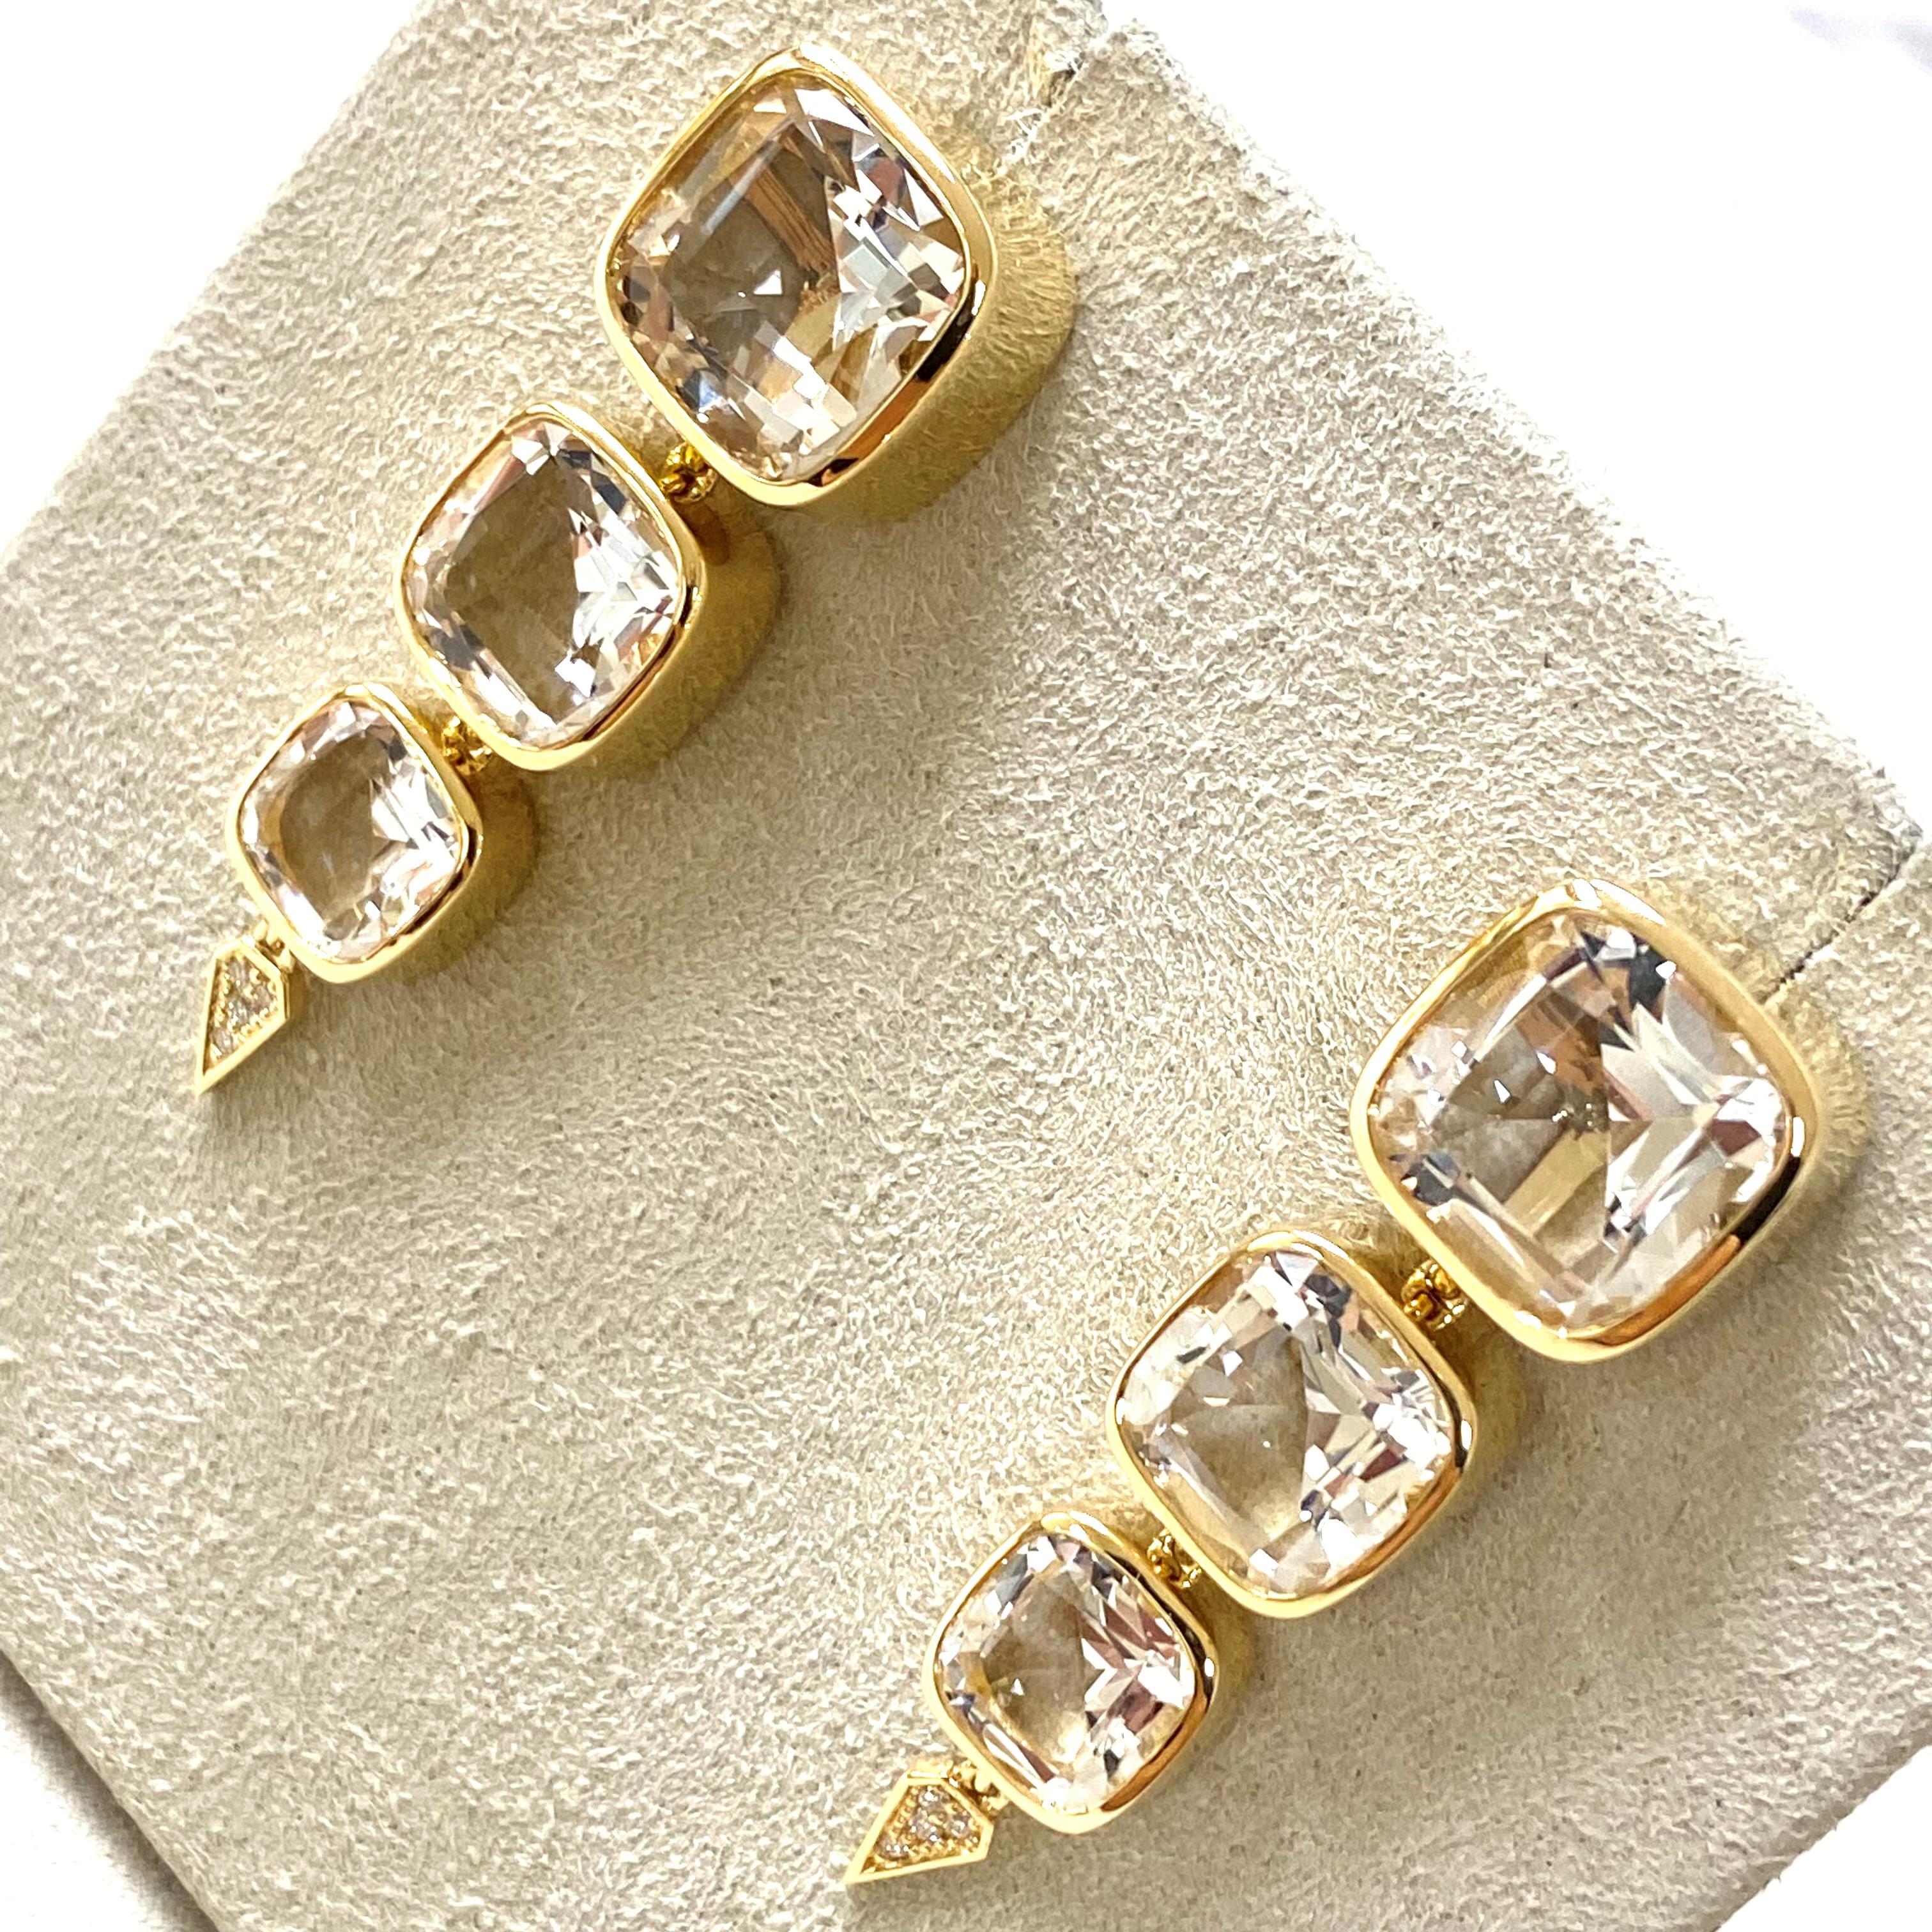 Created in 18 karat yellow gold
Rock Crystal 15 carats approx.
Champagne diamonds 0.04 carat approx.
Post backs for pierced ears
Limited Edition

About the Designers

Drawing inspiration from little things, Dharmesh & Namrata Kothari have created an